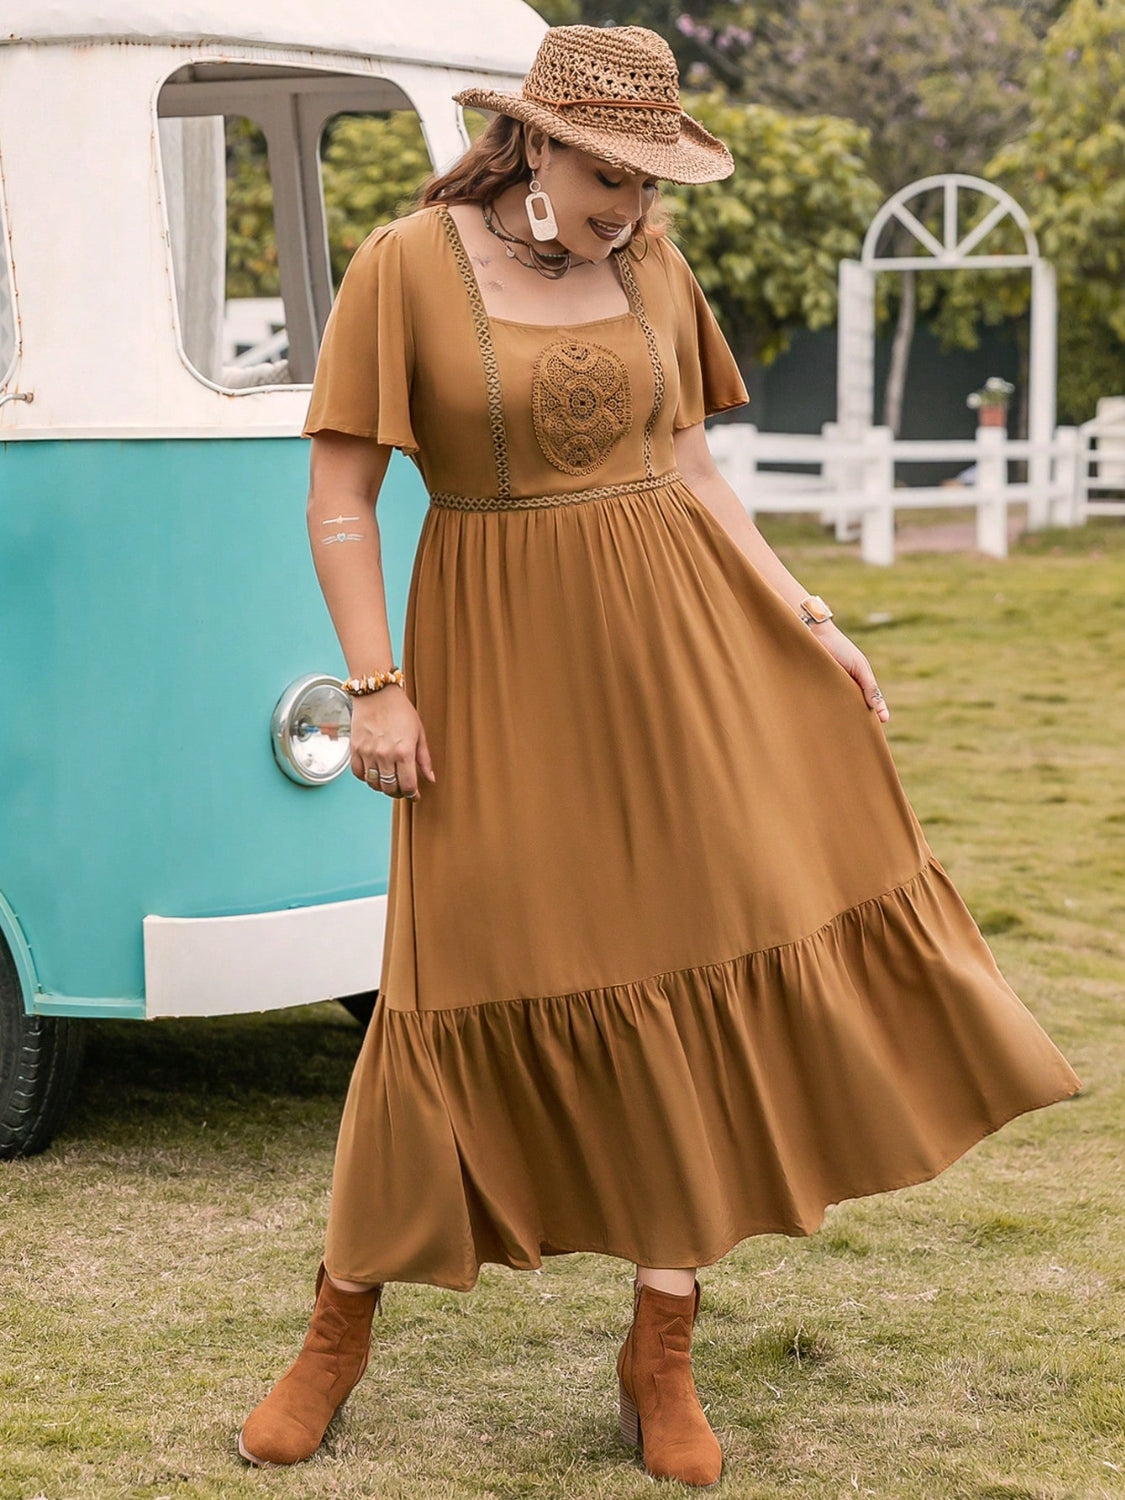 Elegant Plus Size Beach Wedding Guest Dress with Square Neck and Short Sleeves - Ruffle Hem for a Flattering Look